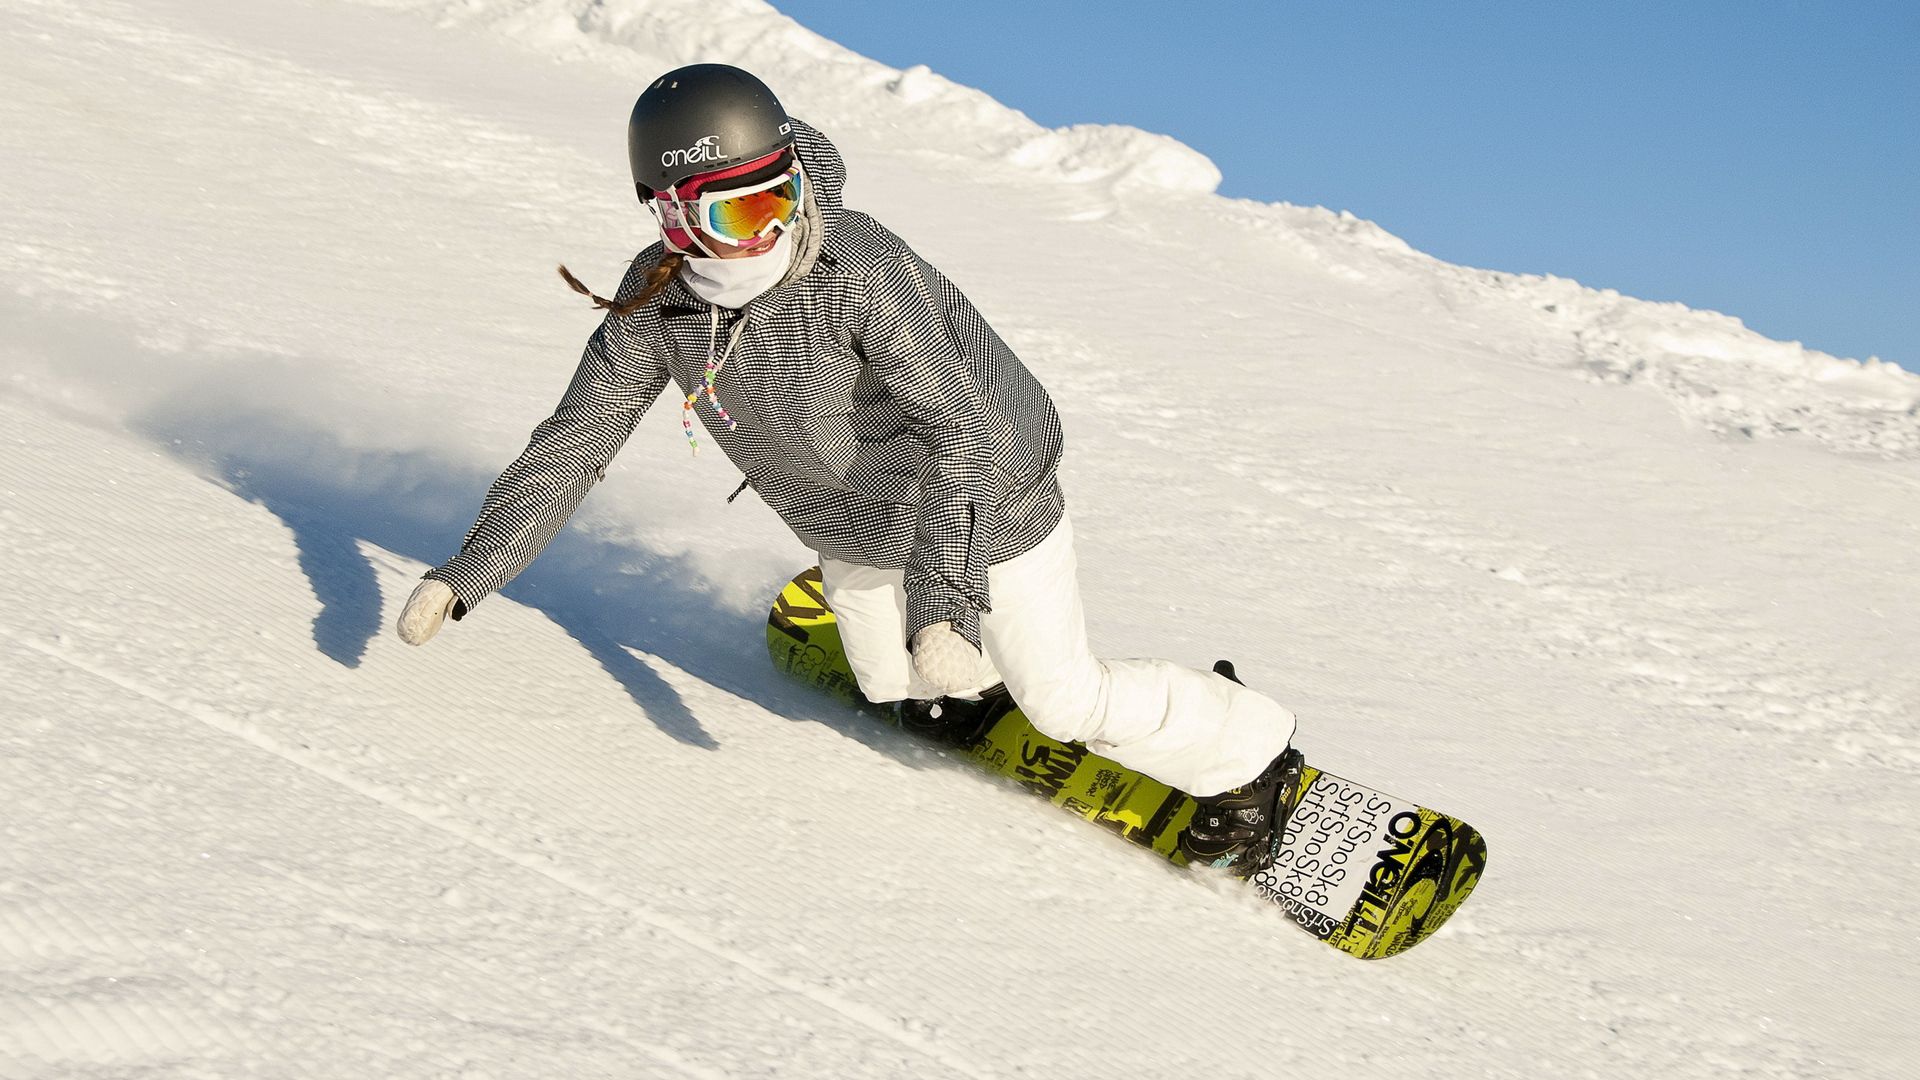 descent, sports, mountain, girl, board, snowboard, extreme